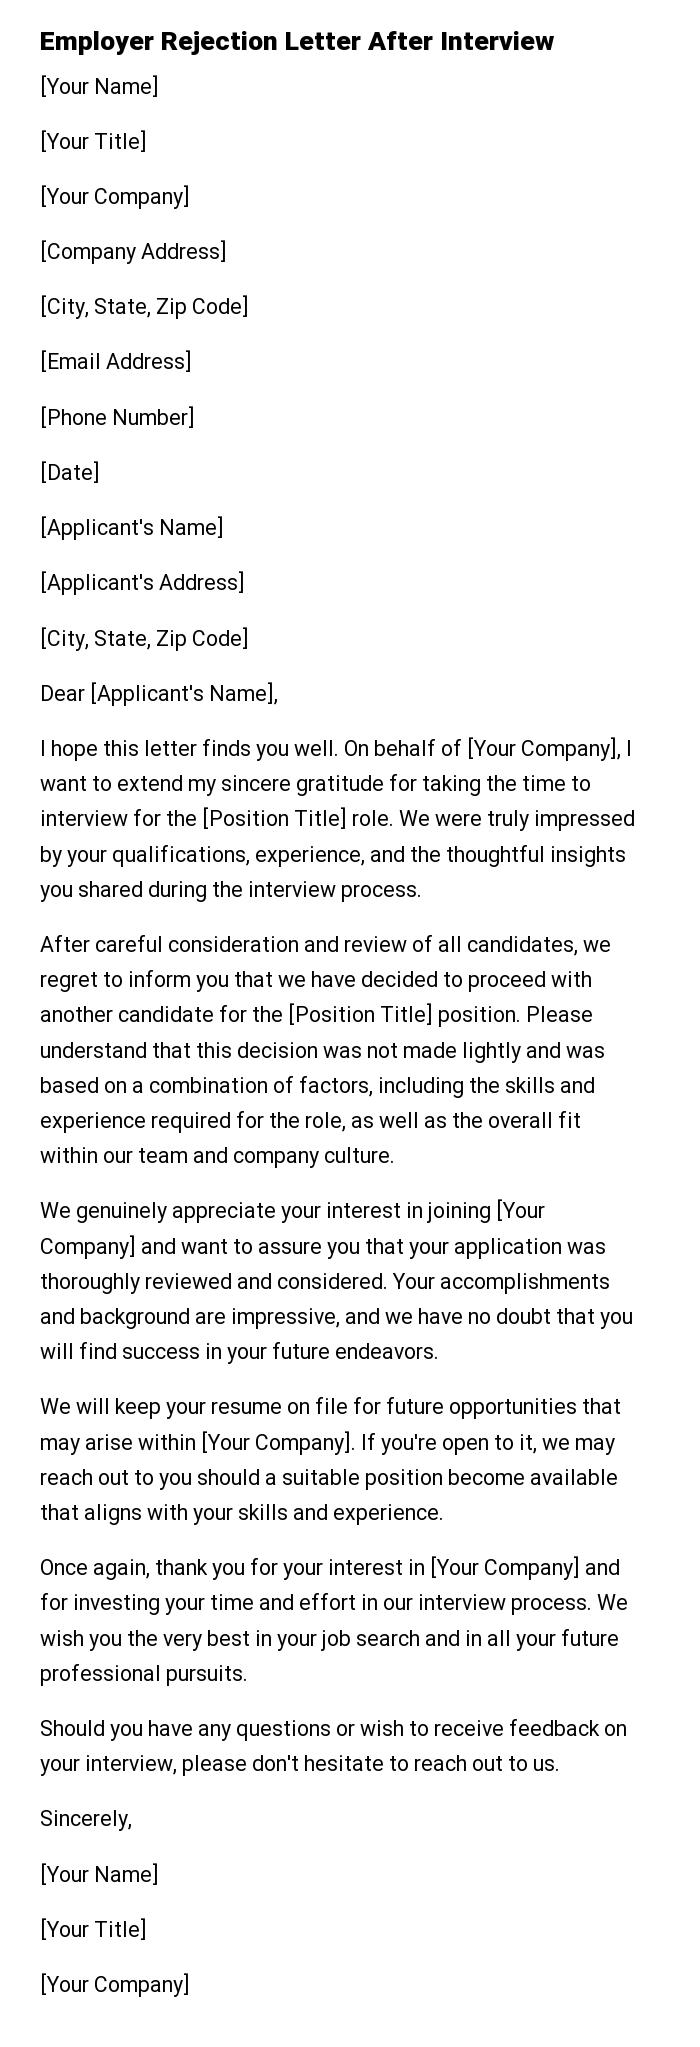 Employer Rejection Letter After Interview